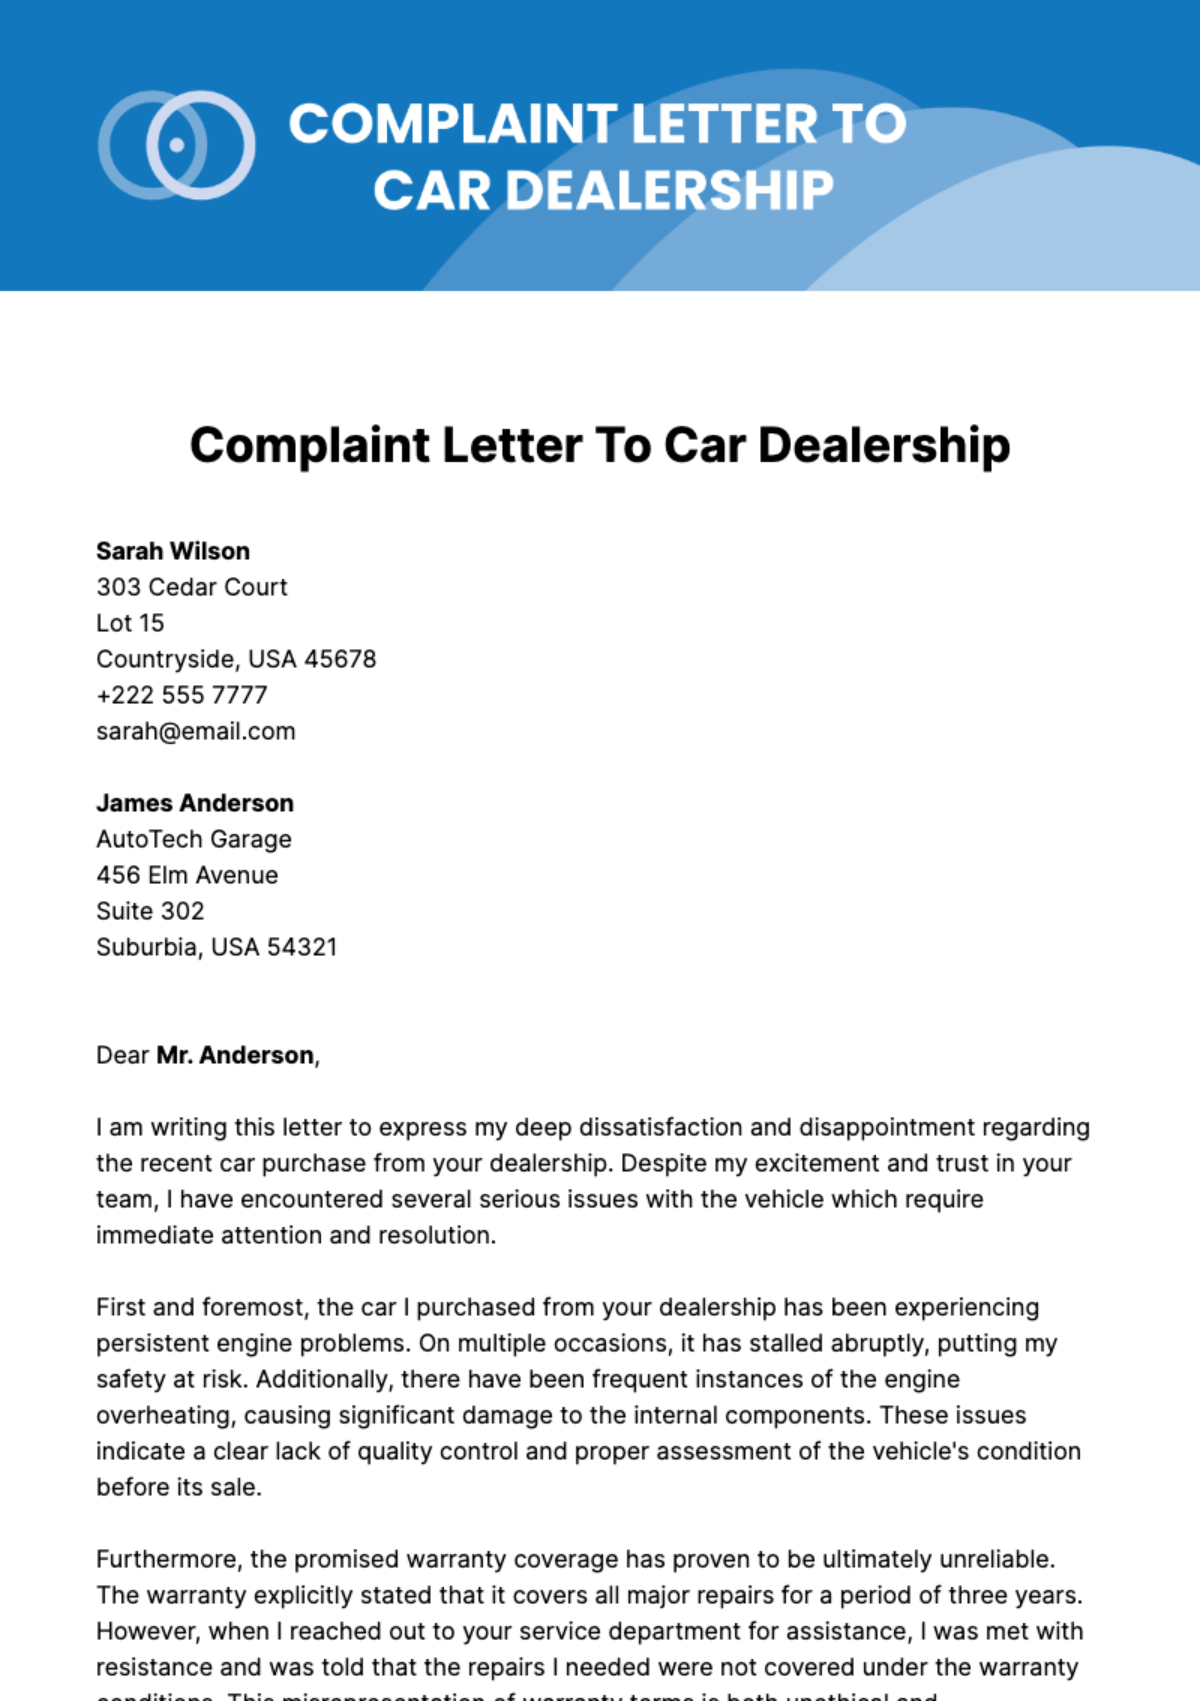 Free Complaint Letter To Car Dealership Template